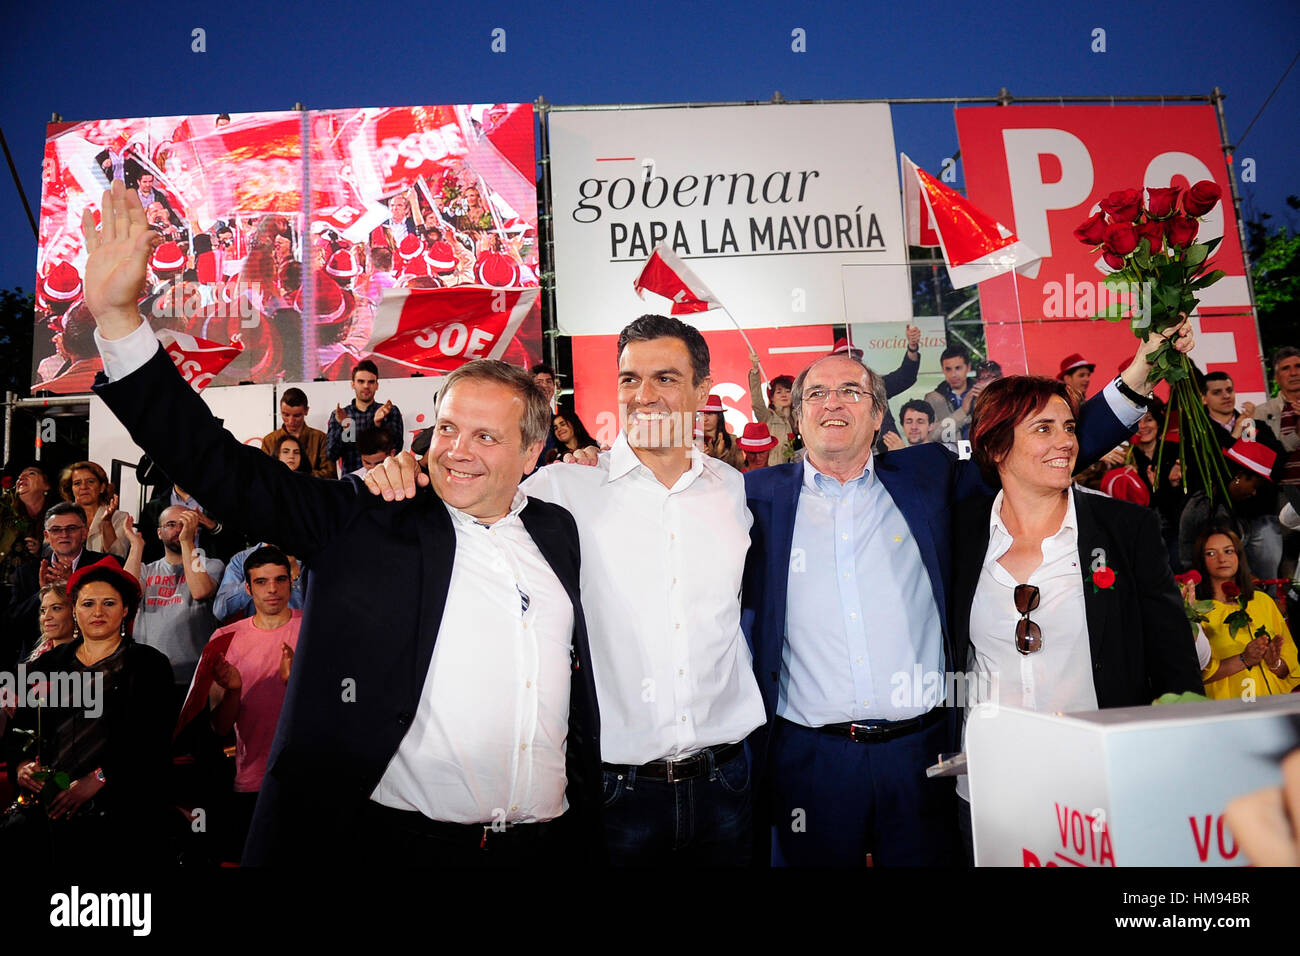 Socialist Party leader, Pedro Sanchez with Socialist Party candidate for Region of Madrid, Angel Gabilondo and Socialist Party (PSOE) candidate for mayor of Madrid, Antonio Miguel Carmona attend the closure of the campaign election of Socialist Party for the regional and municipal election in Madrid, on Friday 22th May, 2015 Stock Photo